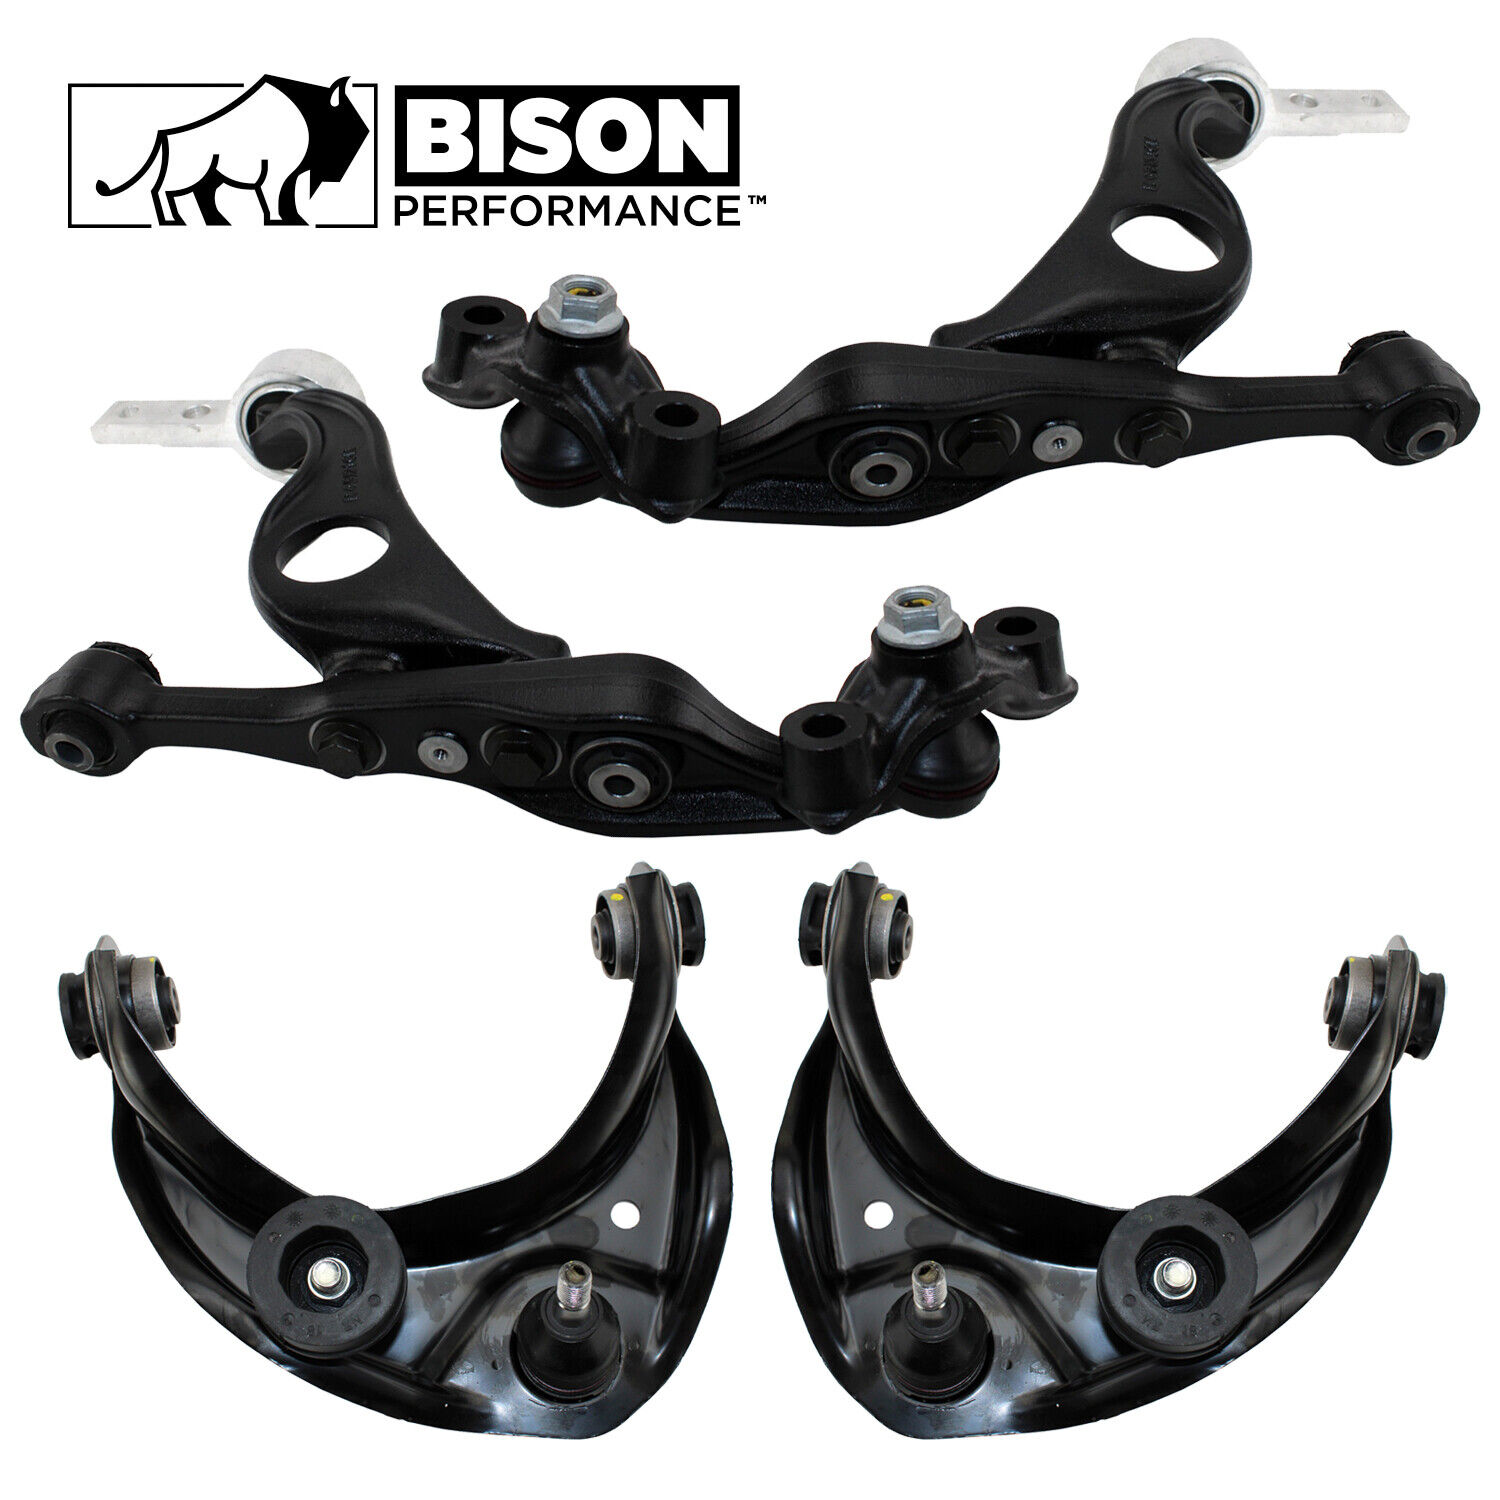 Bison Performance 4pc Front Upper & Lower Control Arms Kit For Mazda 6 2009-2013